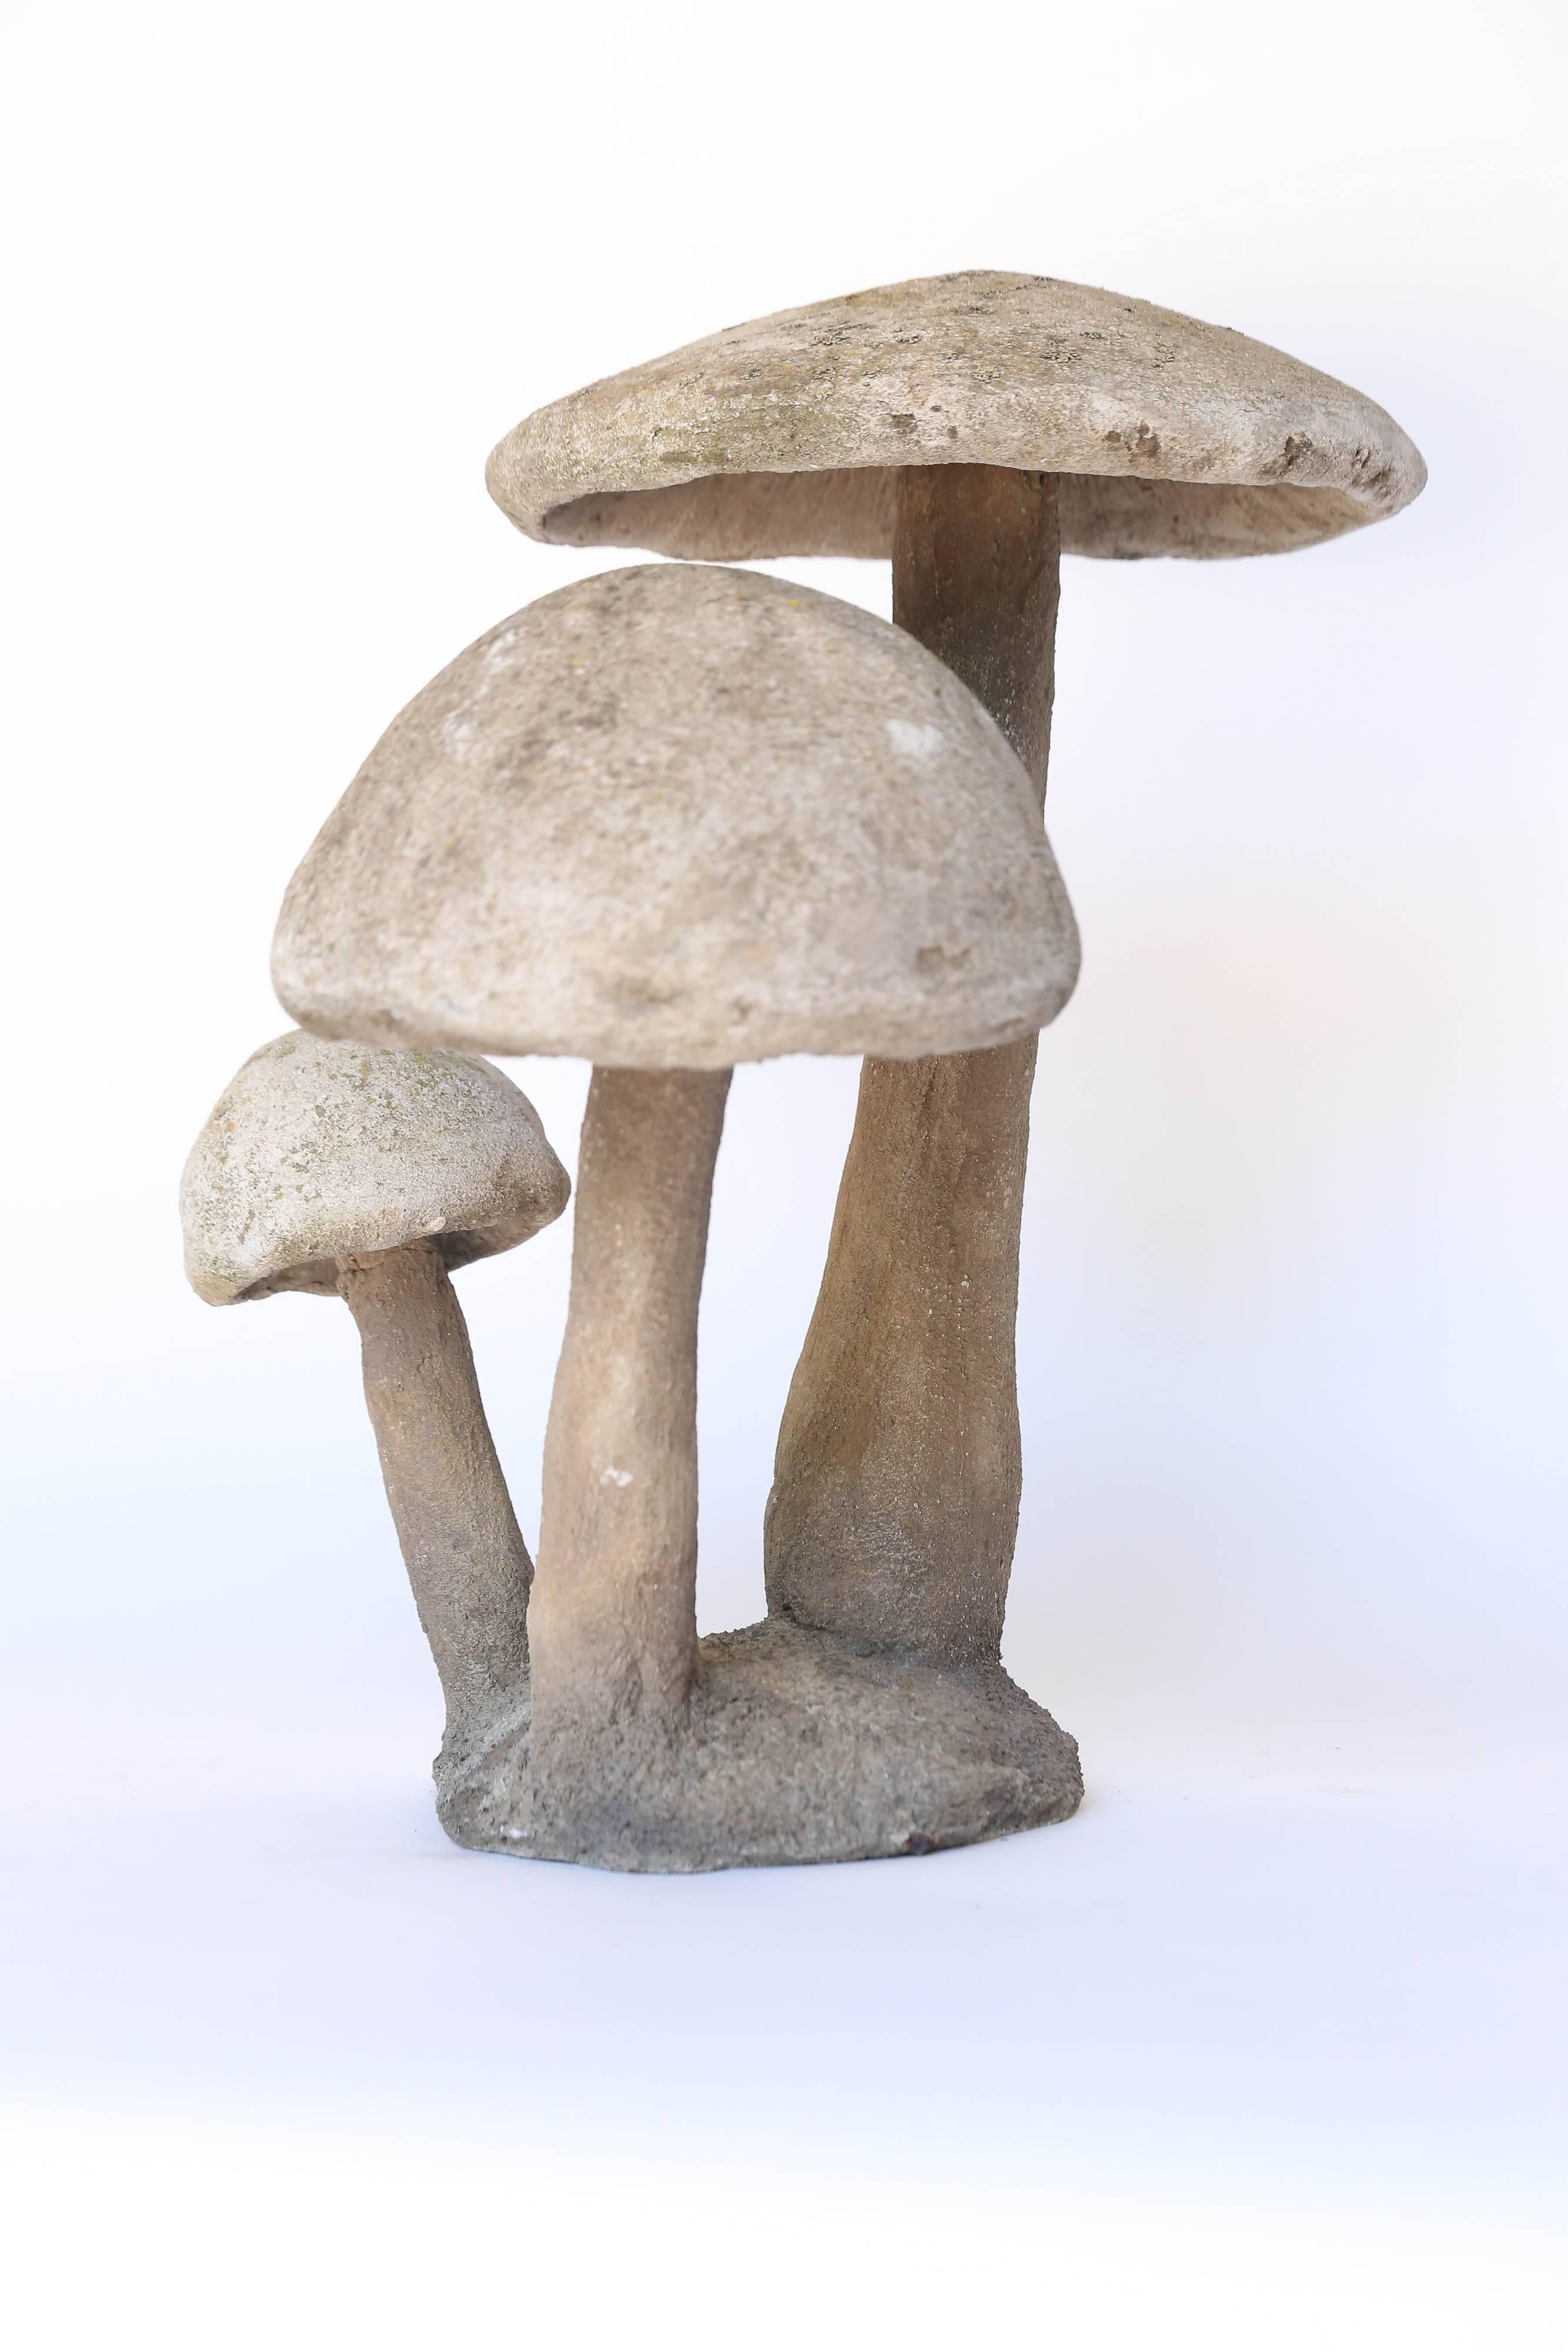 Group of three concrete garden Mushrooms found in France. 

Small mushroom measures 11 1/2 inches in height 
Medium mushroom measures 16 1/2 inches in height
Large mushroom measures 22 inches in height.